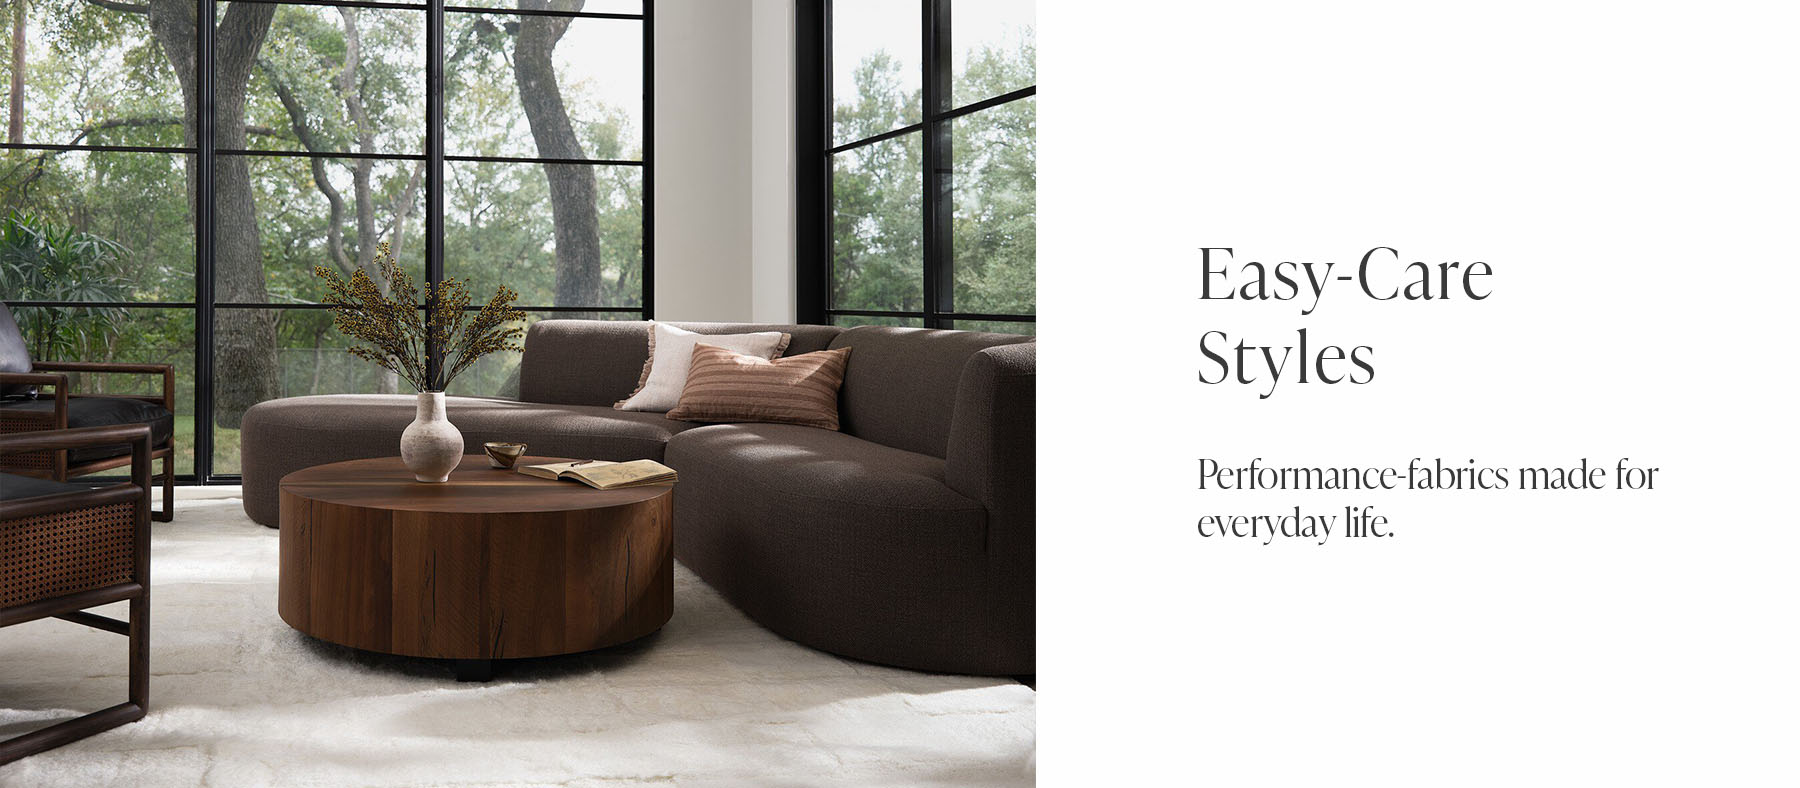 Easy-Care Styles with Performance Fabrics made for everyday life